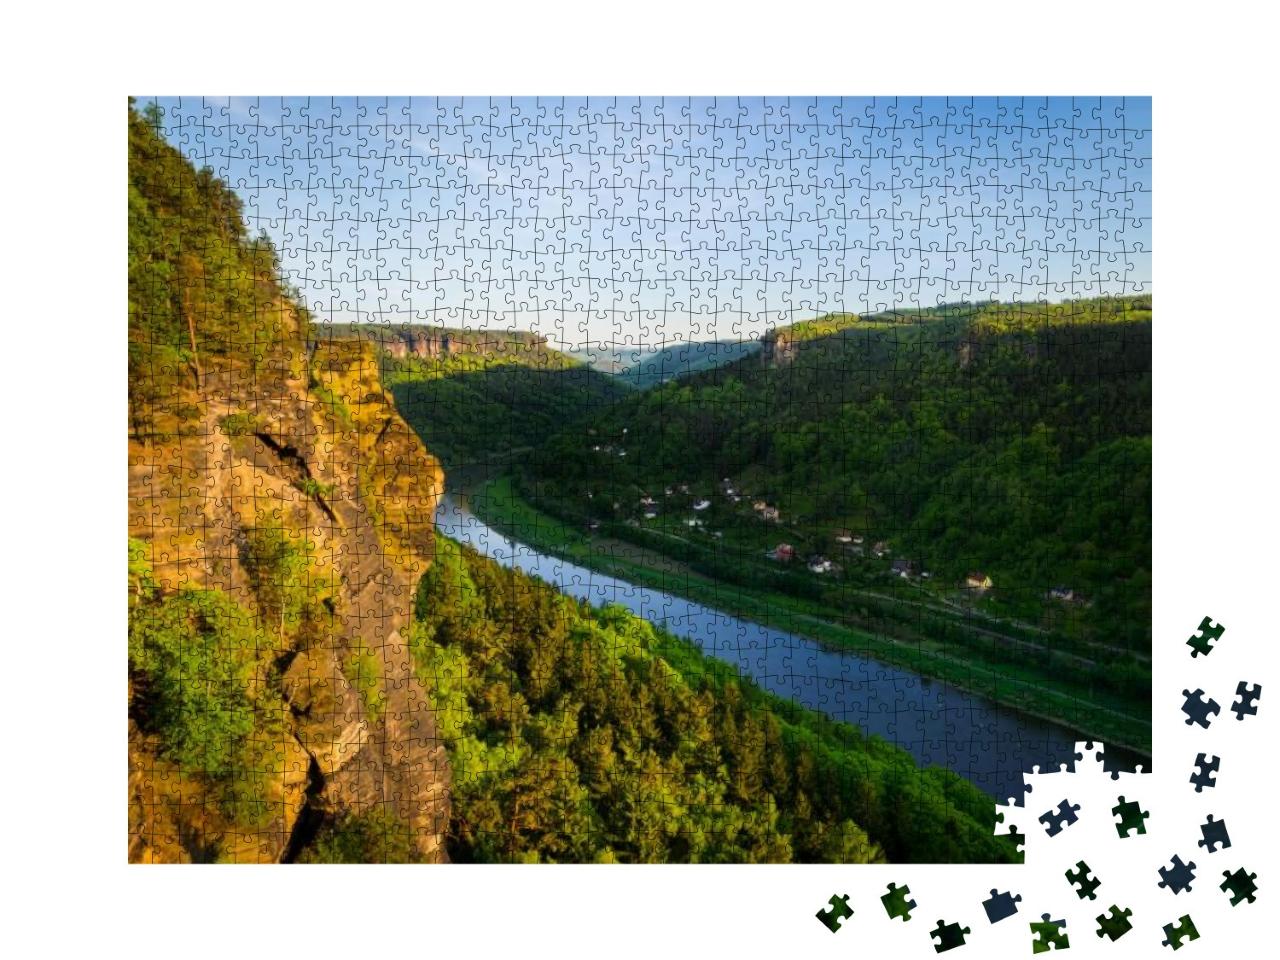 Sandstone Rock Formations & Forests in the Evening Sunshi... Jigsaw Puzzle with 1000 pieces